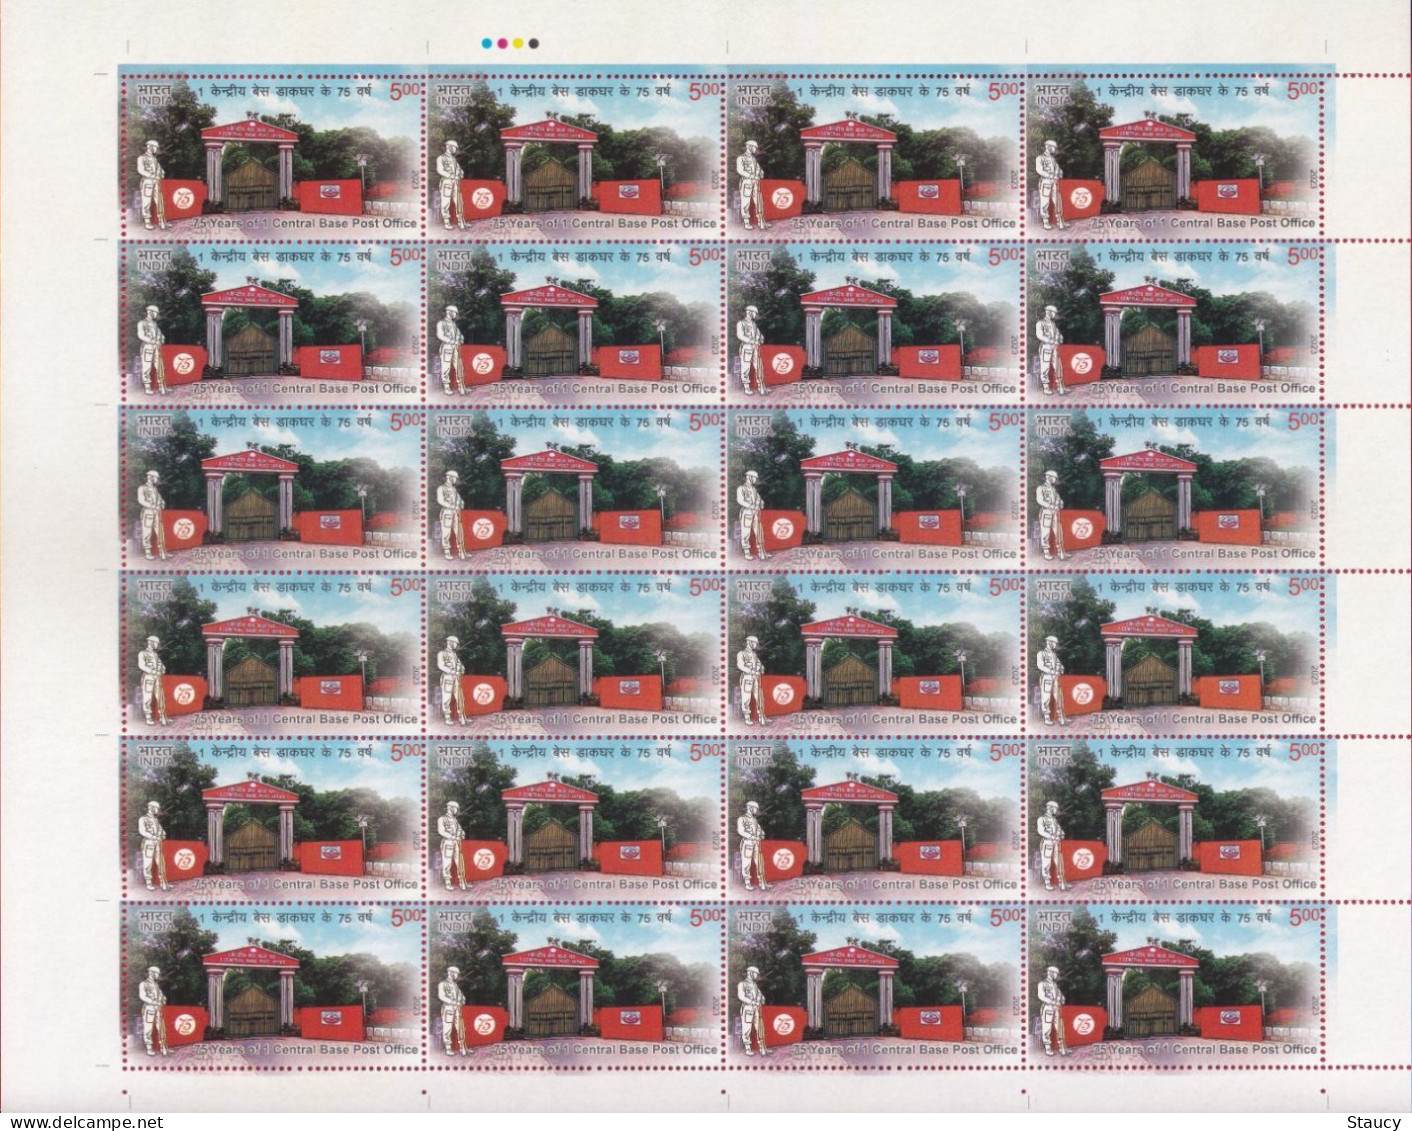 India 2023 75 Years Of 1 CBPO CENTRAL BASE POST OFFICE Full Sheet  Of 24 STAMPS Of Rs.5.00 MNH As Per Scan - Nuovi